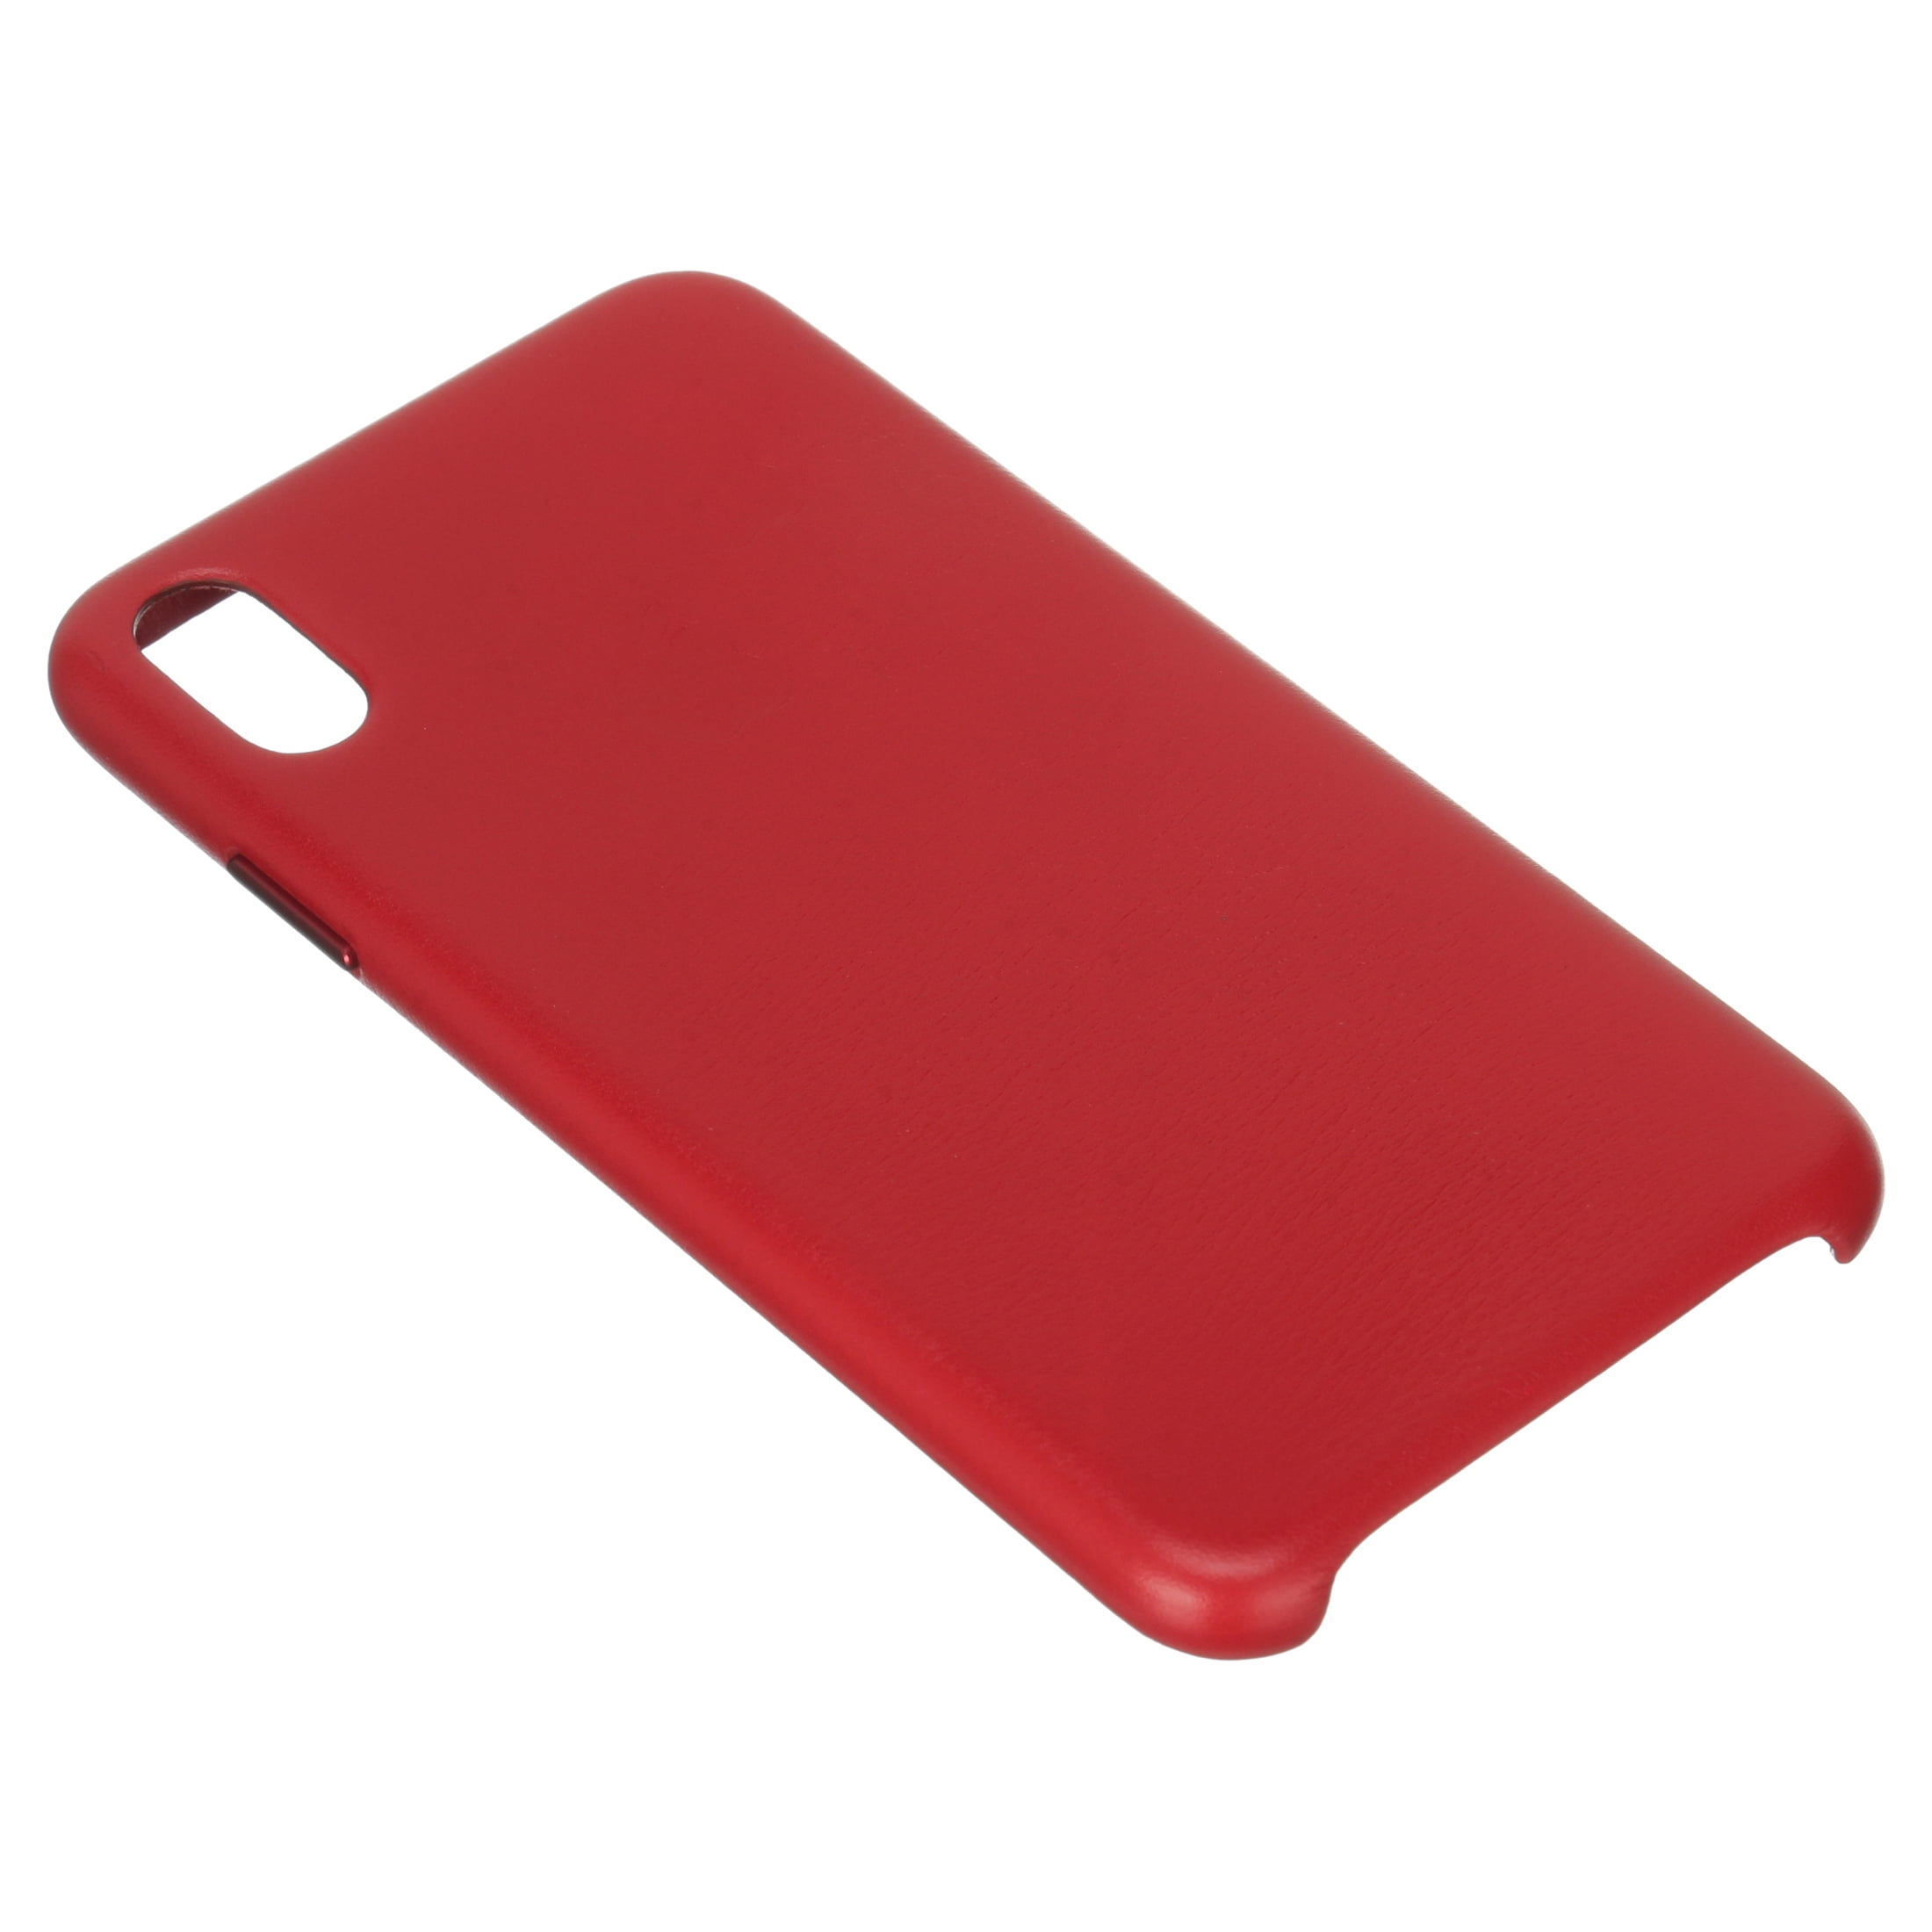 roterende Perth Blackborough Skulptur Apple Leather Case for iPhone XS Max - (PRODUCT)RED - Walmart.com